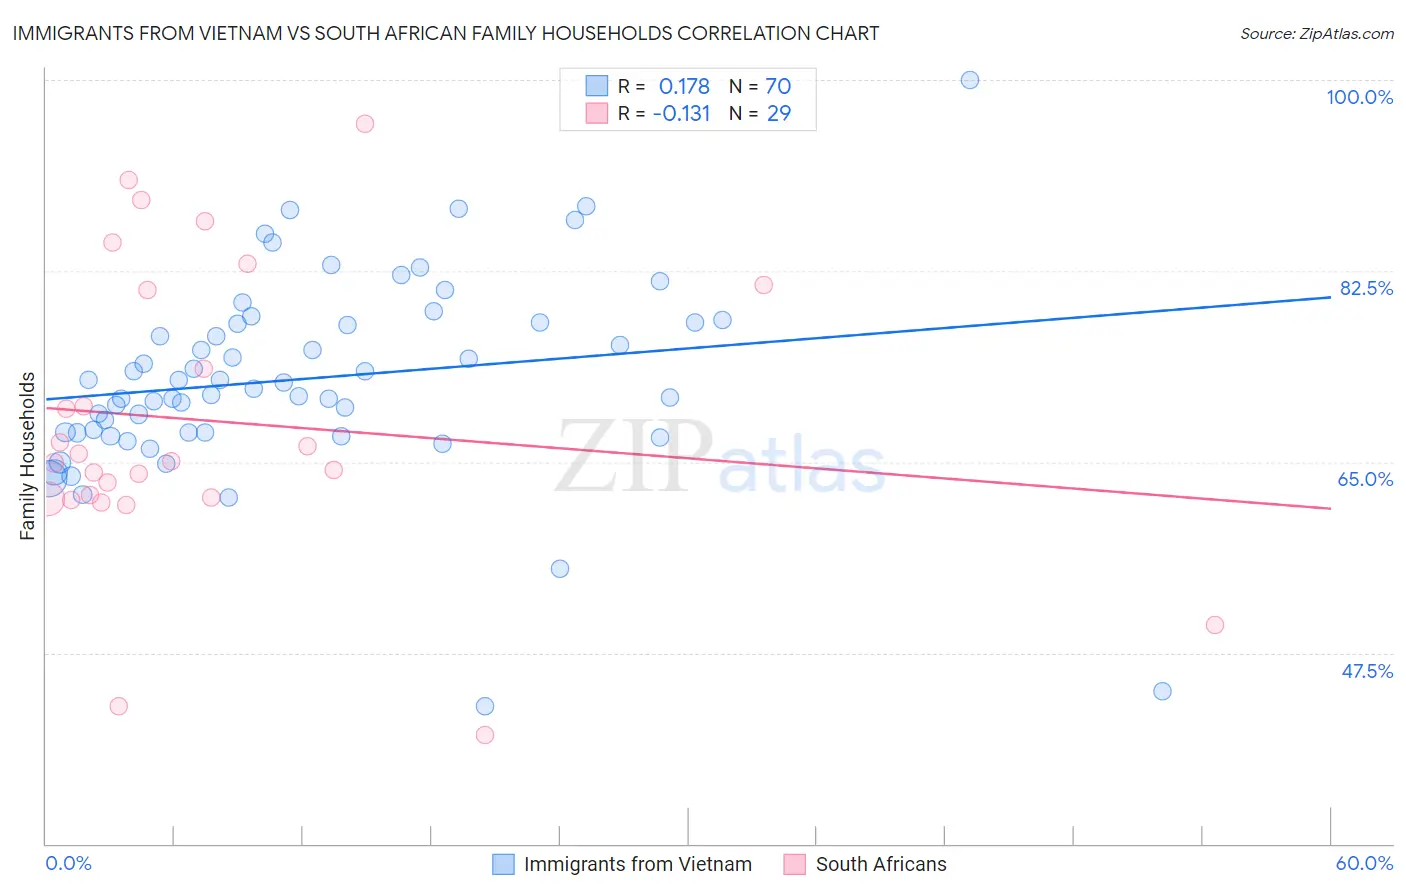 Immigrants from Vietnam vs South African Family Households